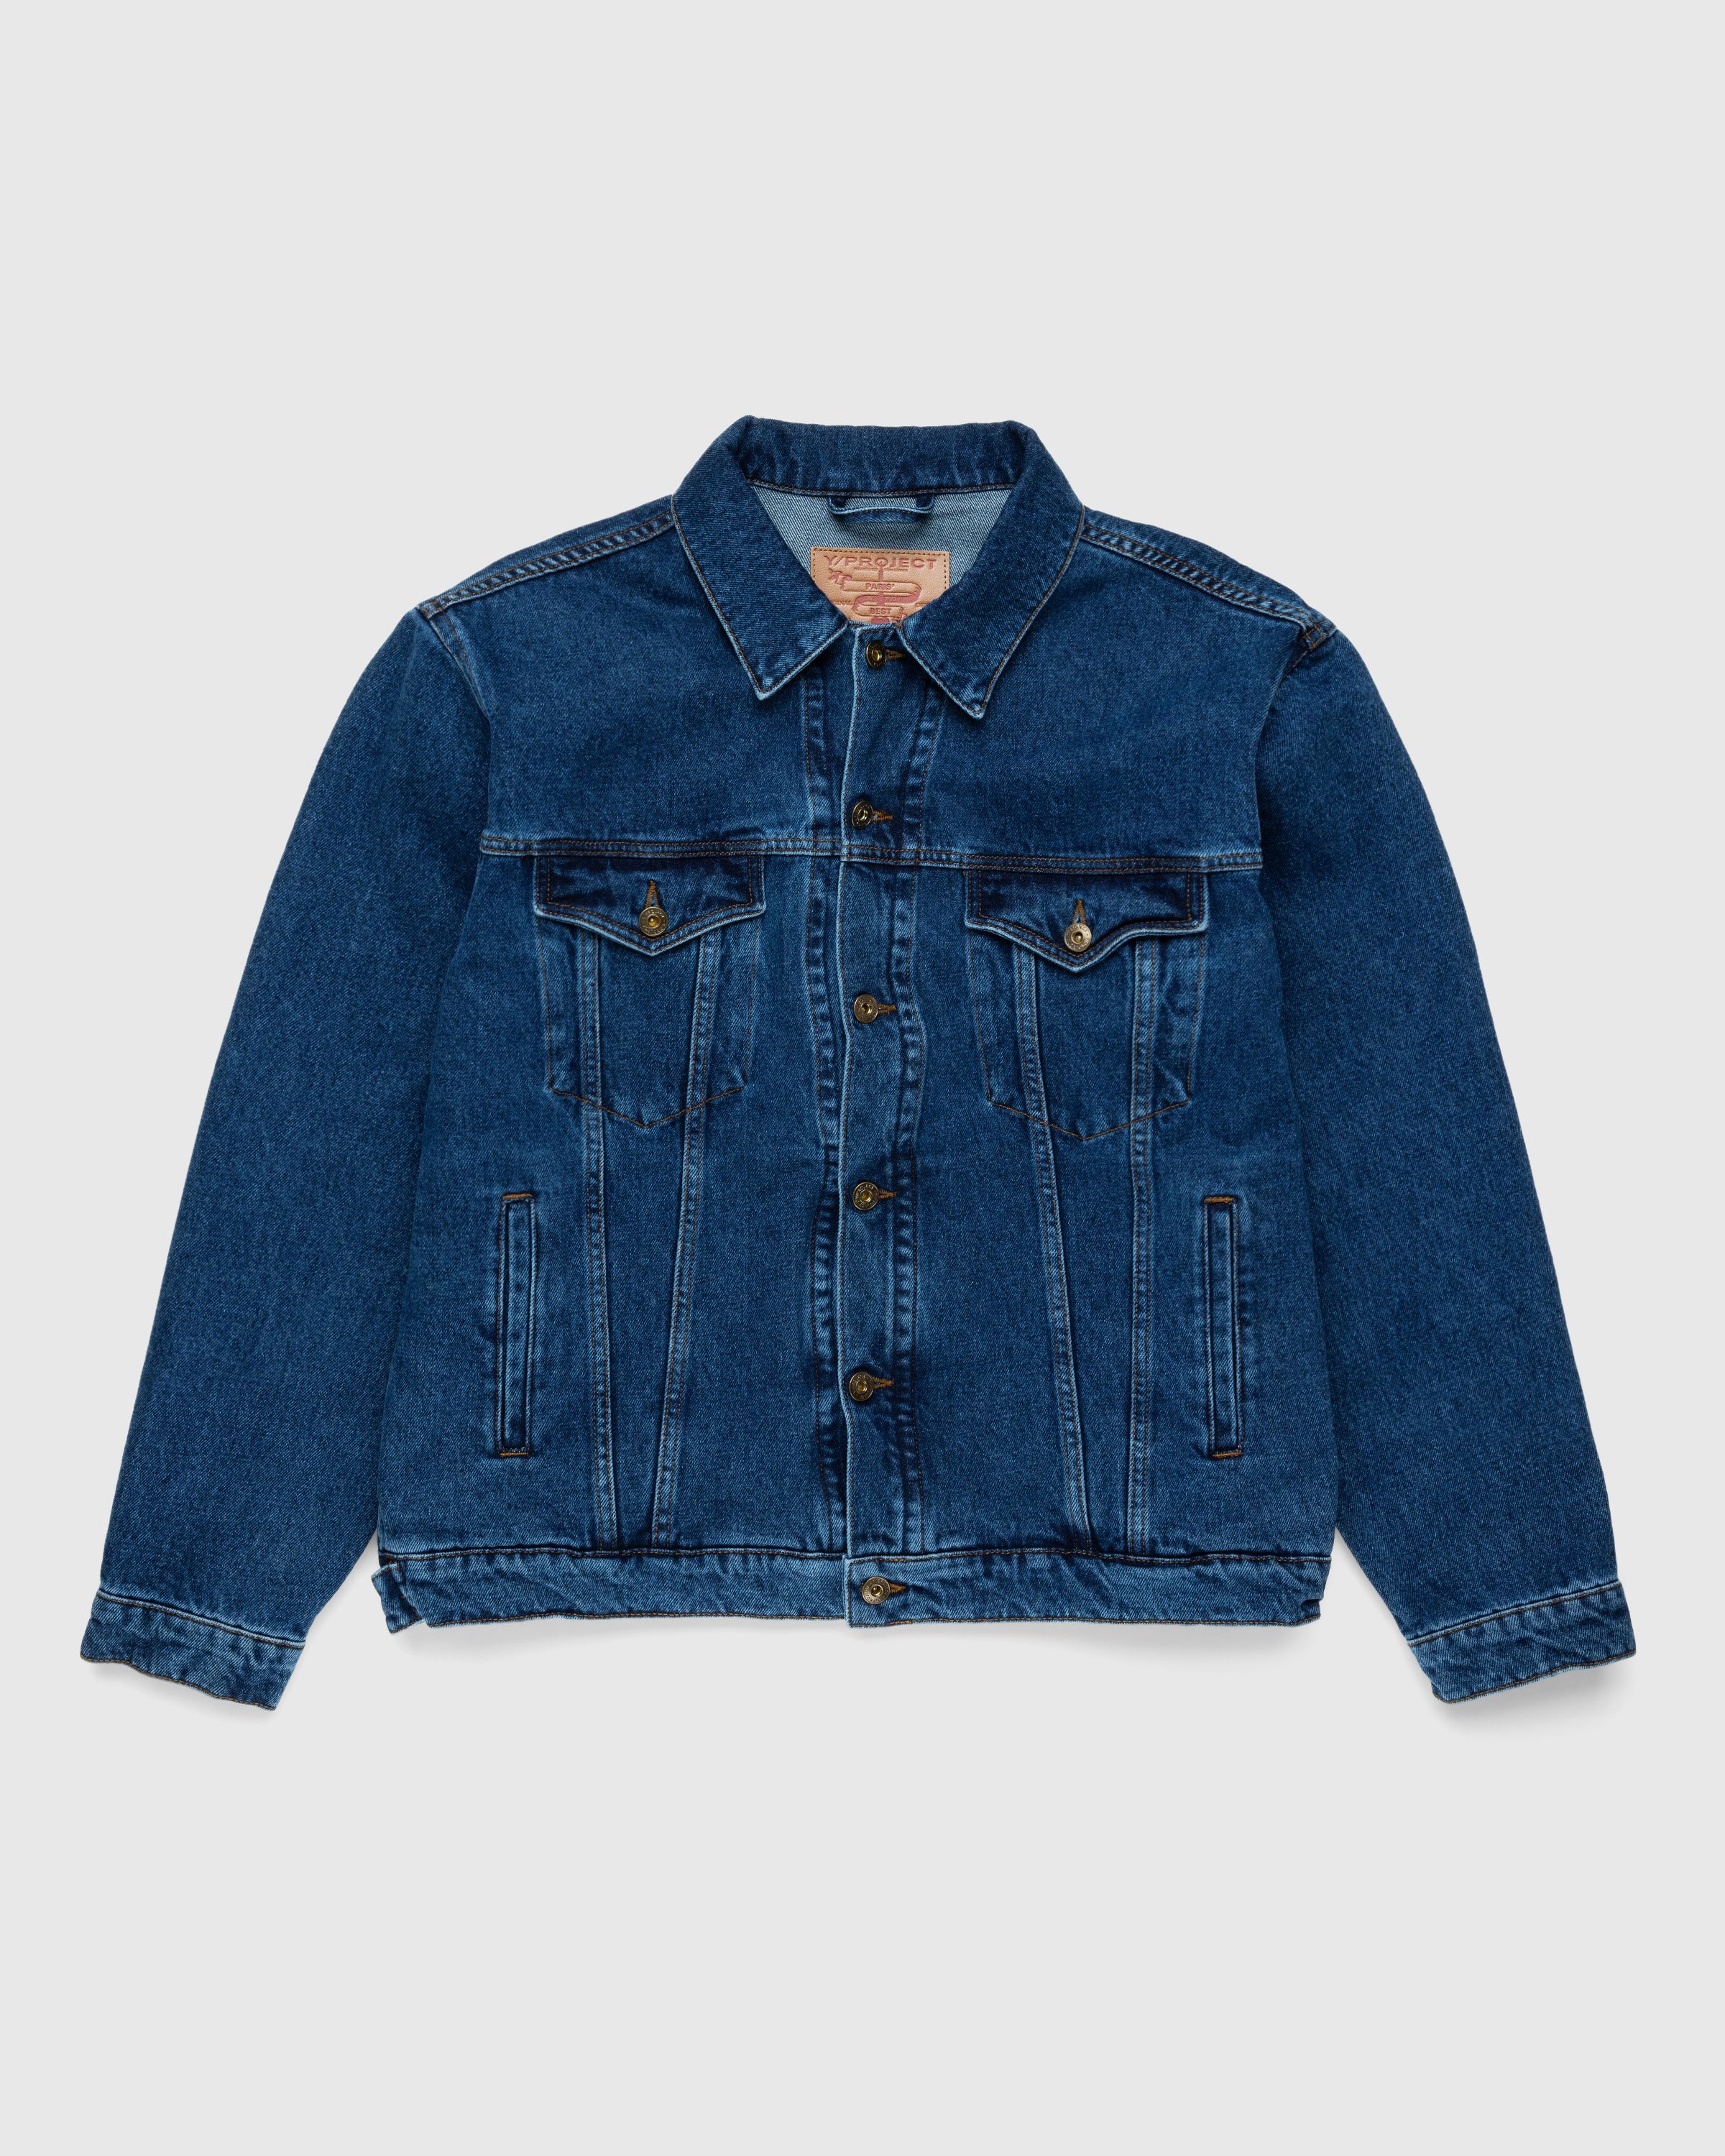 Y/Project - Classic Wire Denim Jacket Navy - Clothing - Blue - Image 1